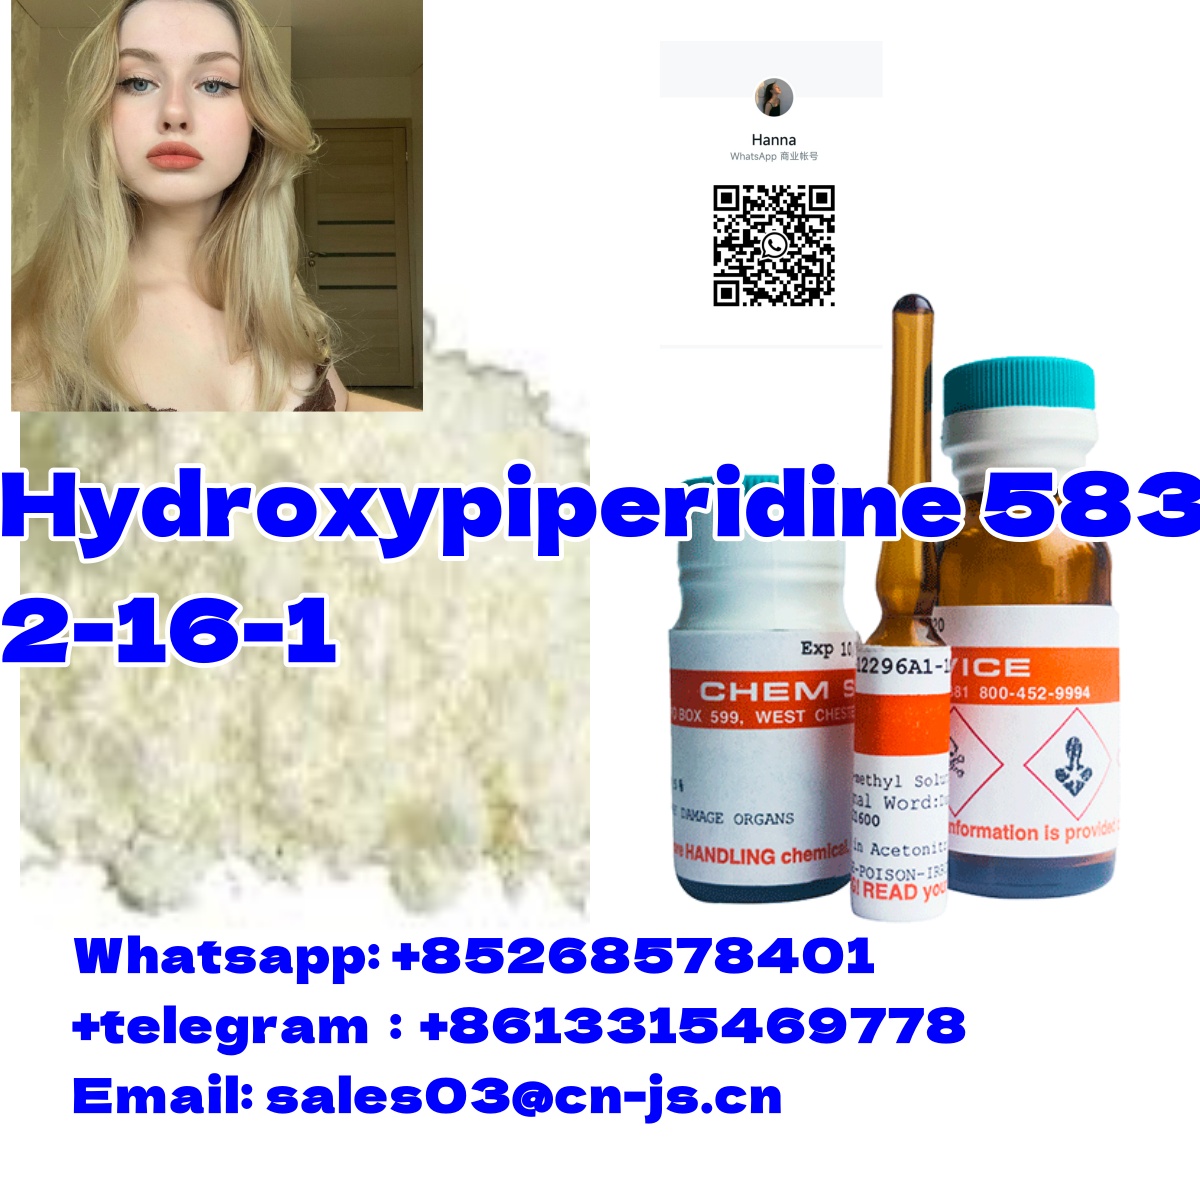 factory Outlet Hydroxypiperidine 5832－16－1,11,Cars,Free Classifieds,Post Free Ads,77traders.com